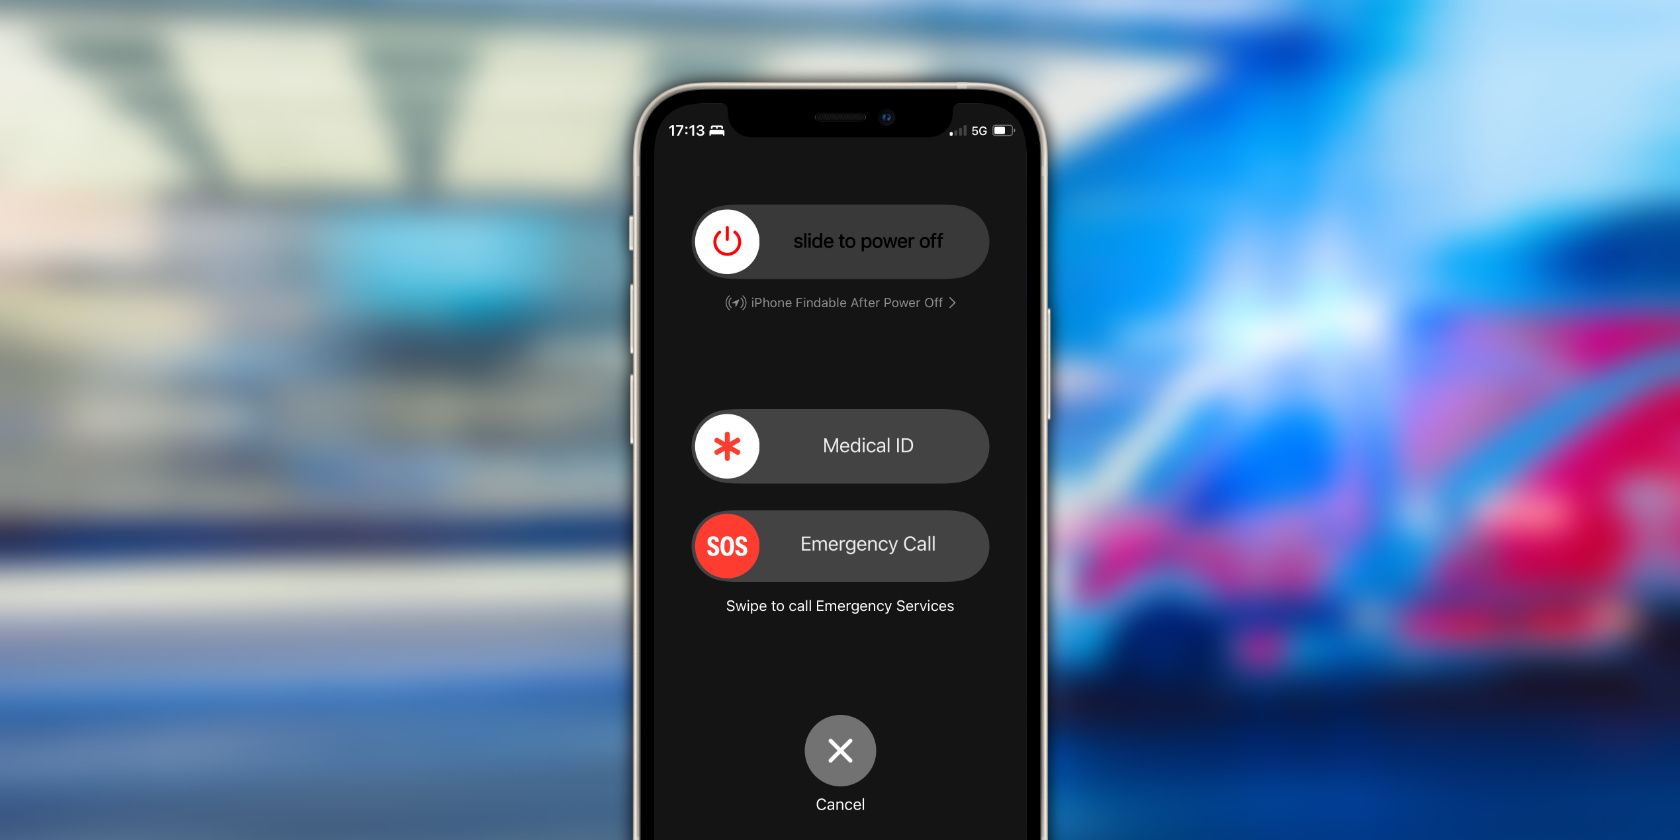 Emergency Screen showing Medical ID on iPhone in front of an ambulance